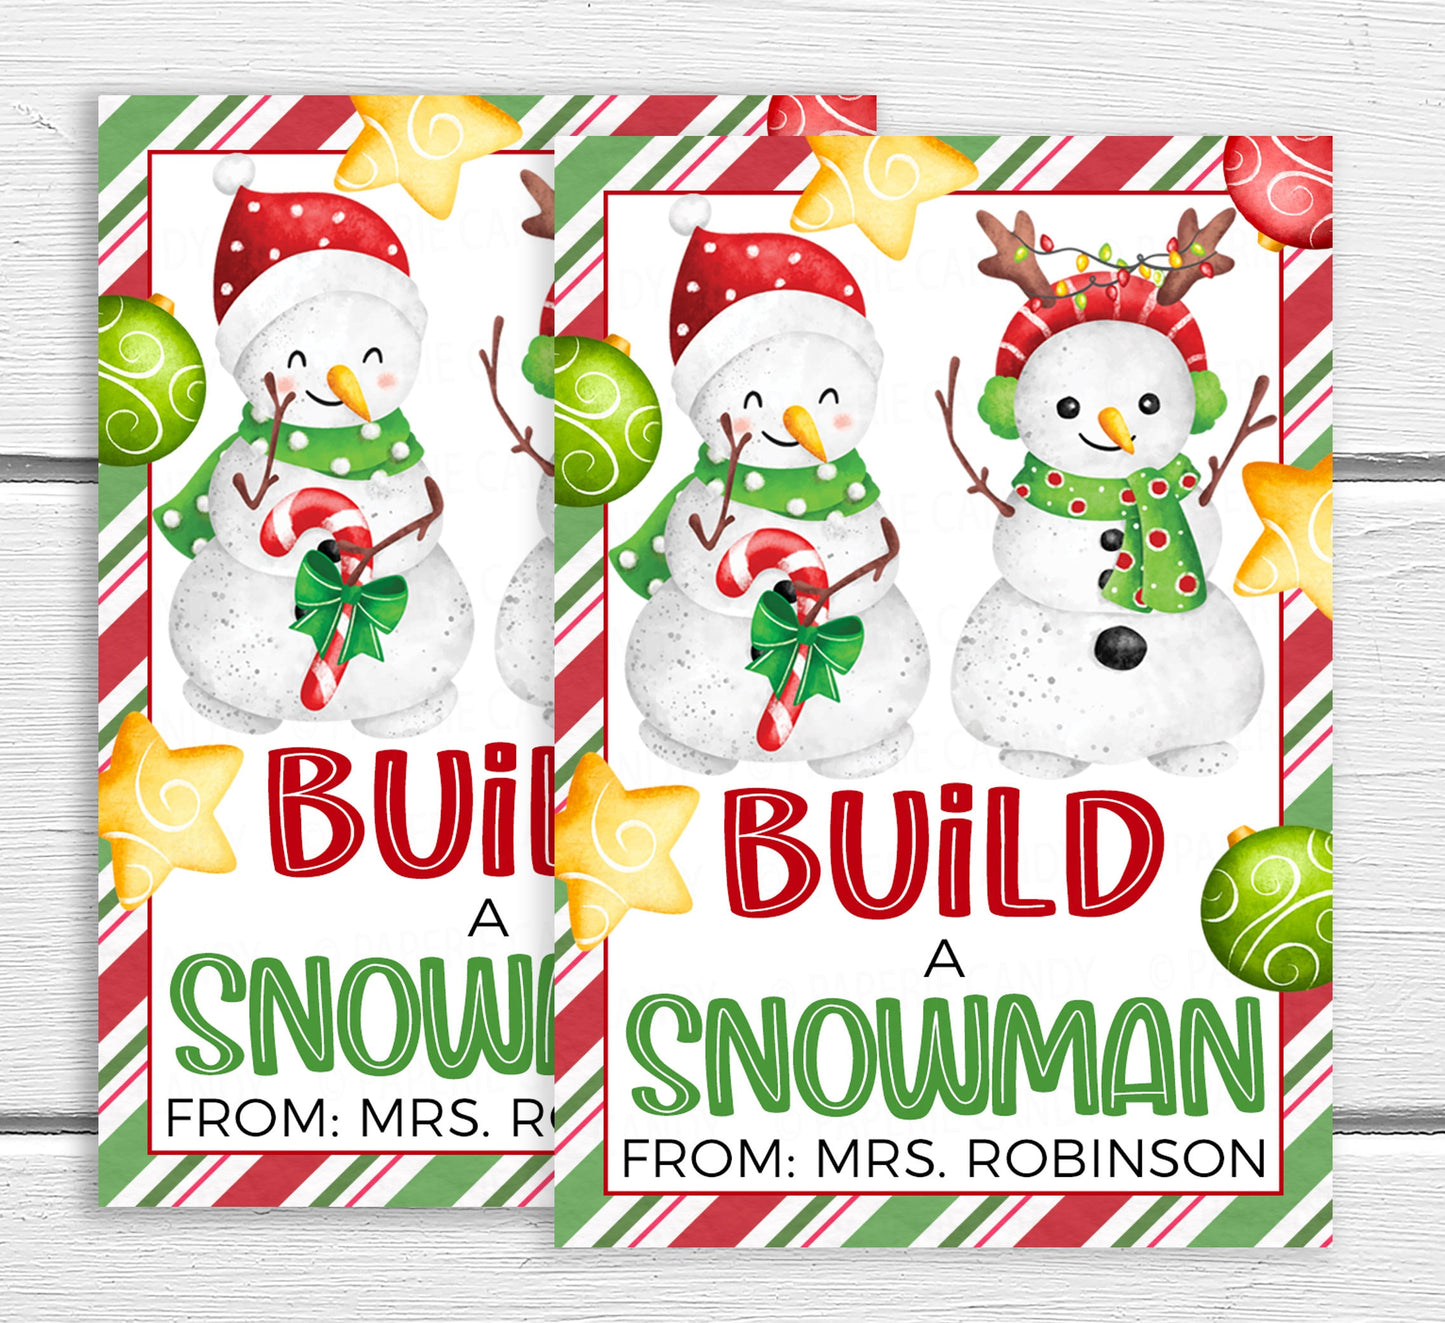 Build A Snowman Gift Tags, Make A Christmas Snowman Craft Play Dough, Gift For Students Classmates, Winter Break, Classroom Party, Printable